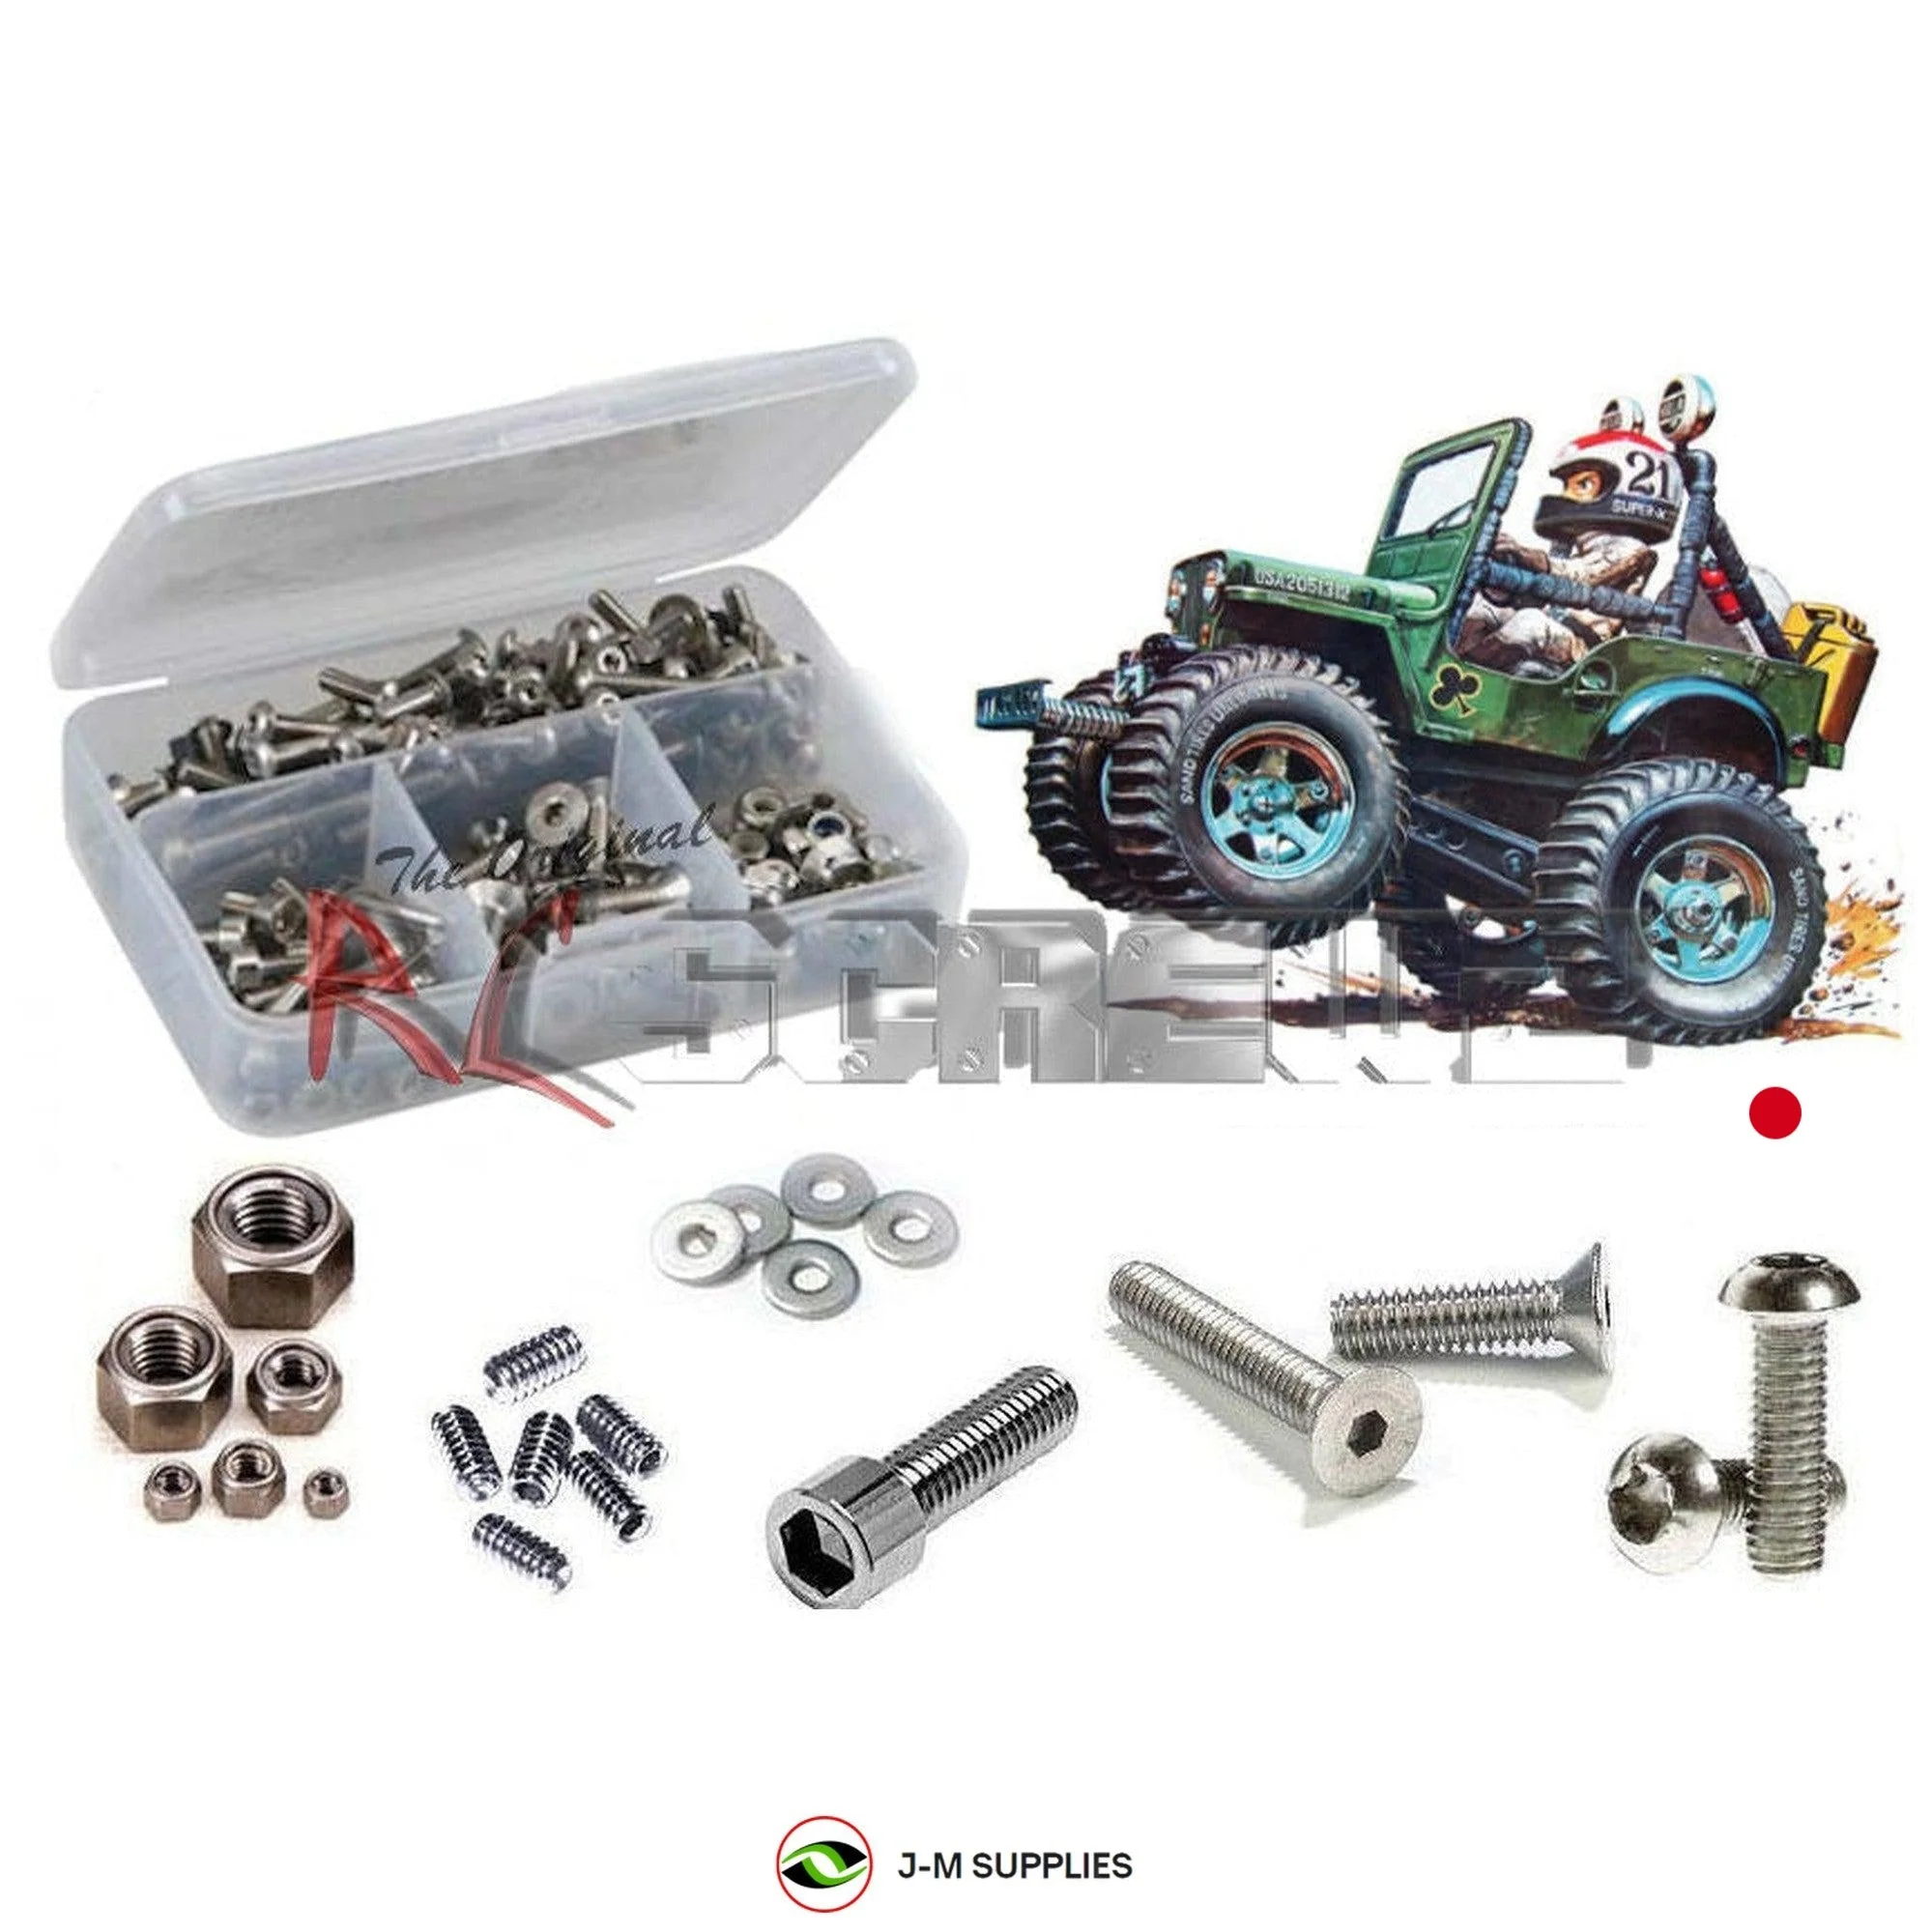 RCScrewZ Stainless Screw Kit tam222 for Tamiya Wild Willy M38 #58035 RC Stunt RC - Picture 1 of 12